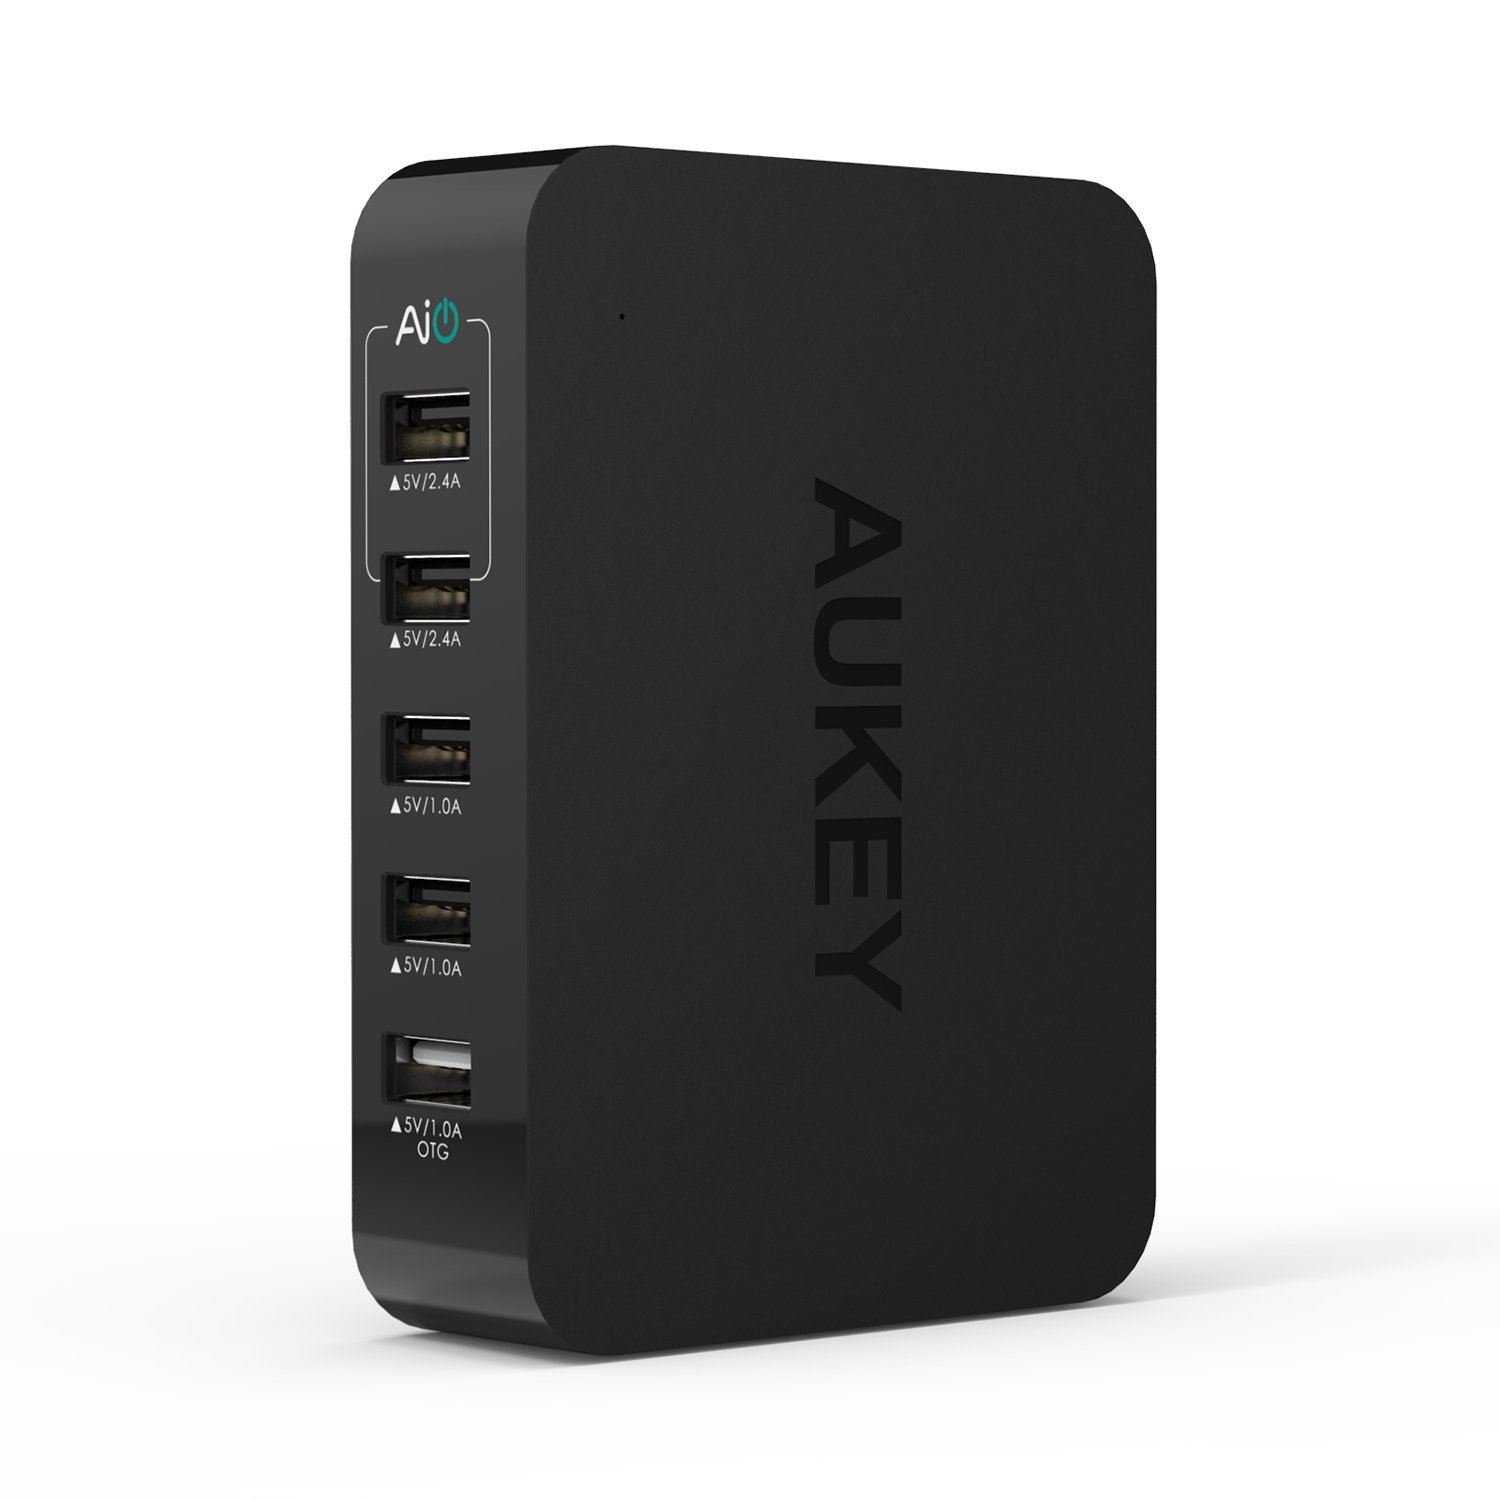 Aukey 39W 7 8A 5 Port USB Travel Charger Charging Station with OTG Access for Android